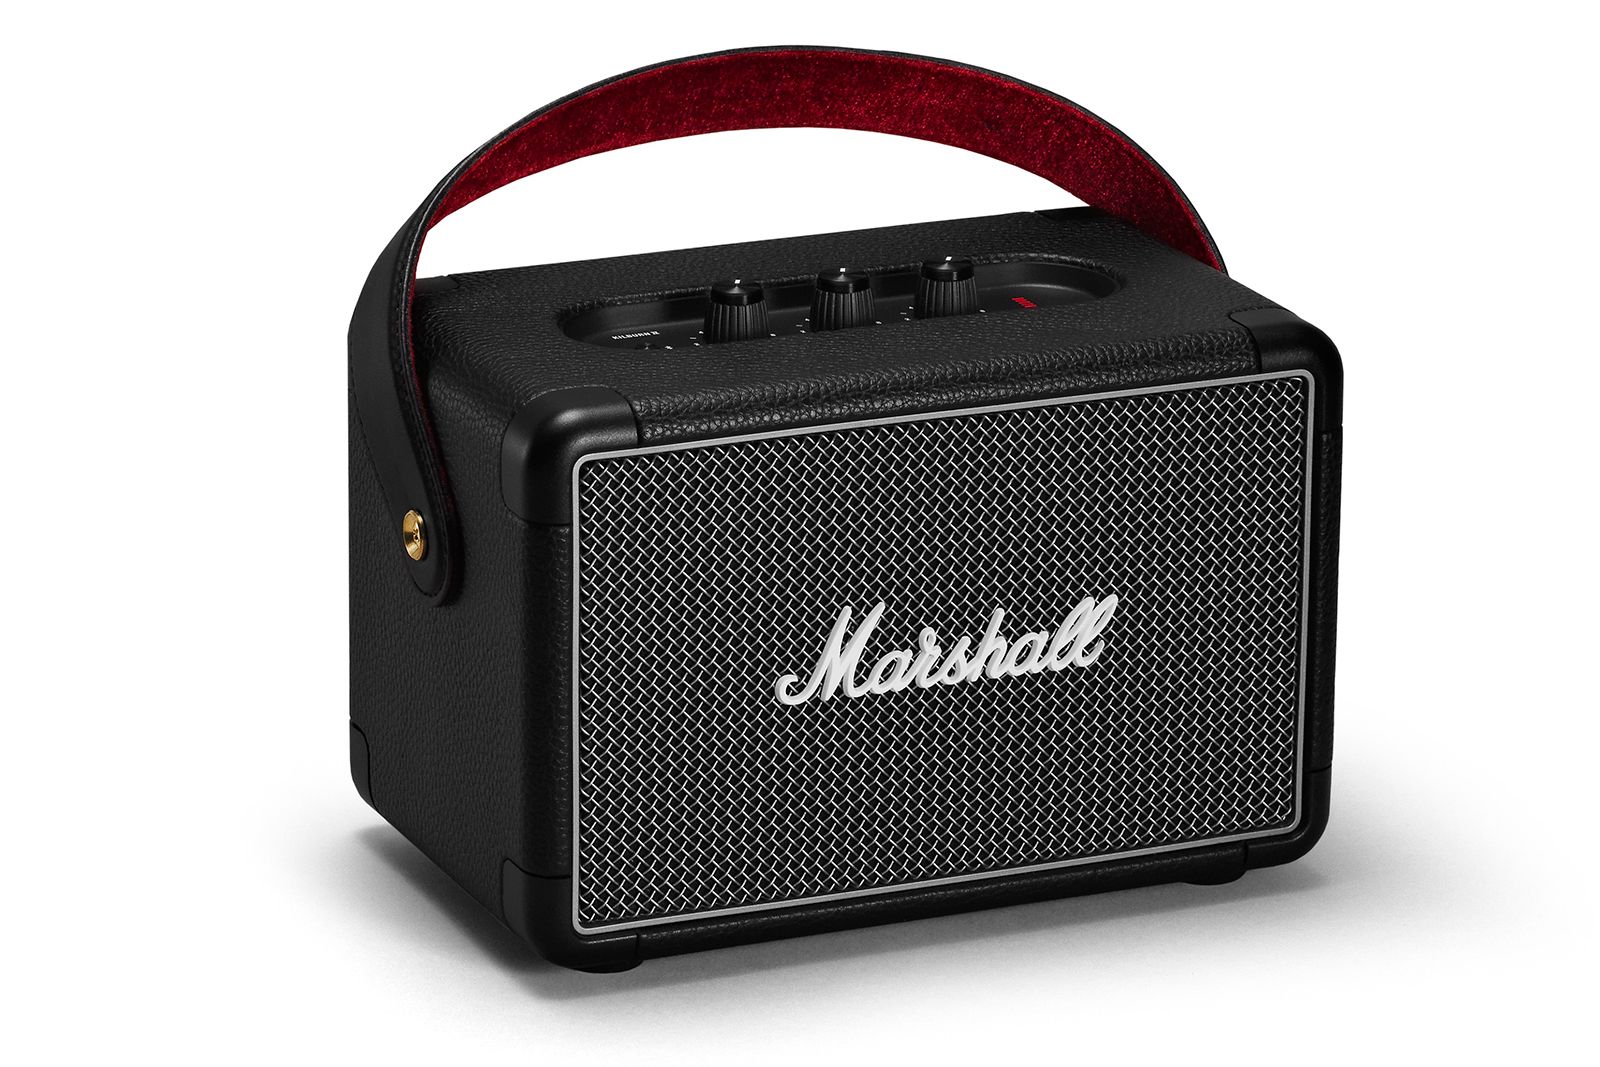 Marshall Kilburn II is the portable Bluetooth speaker to rock out with image 1